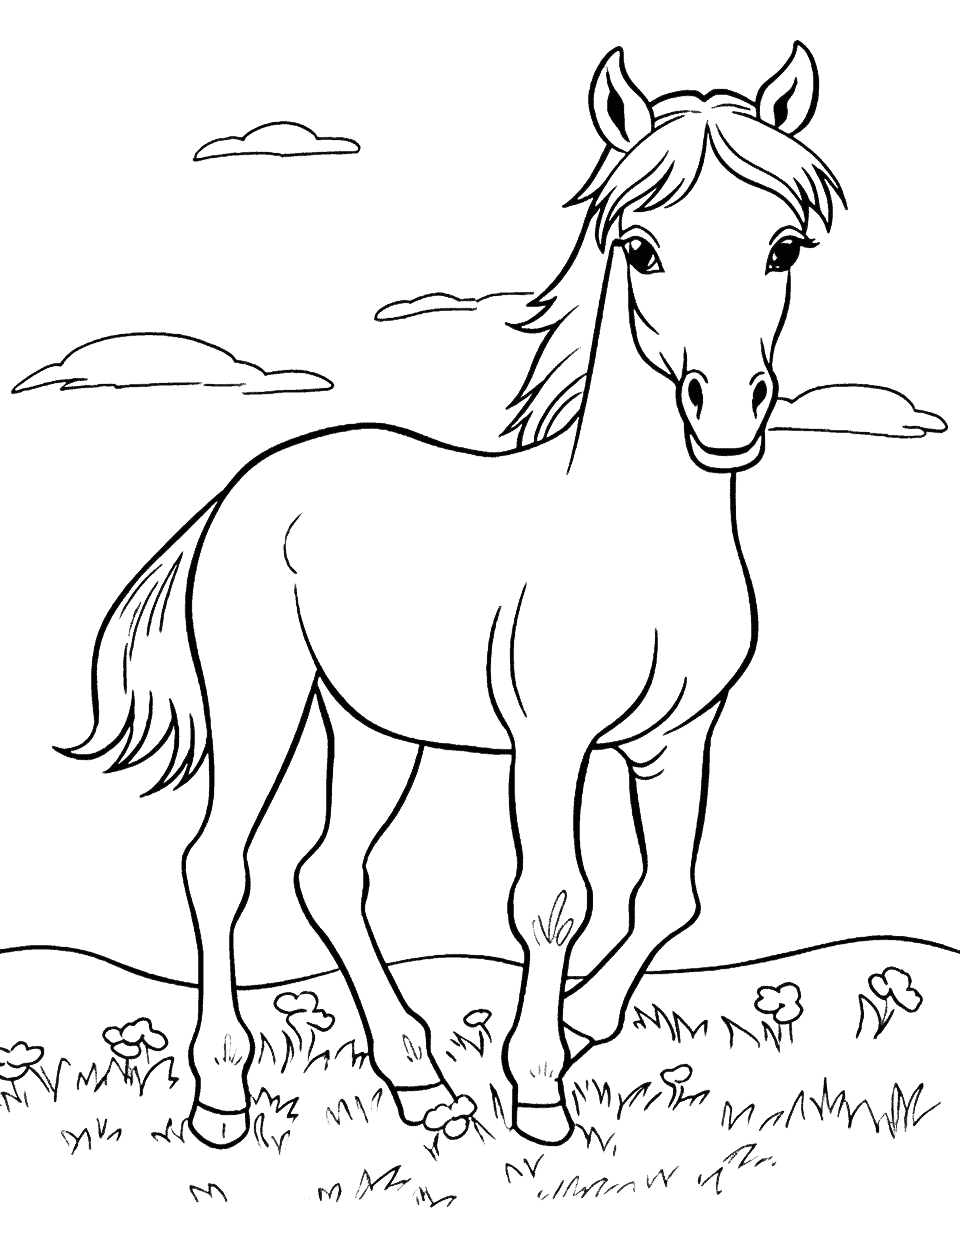 Cute Baby Foal Coloring Page - A cute and easy-to-color picture of a baby foal playing in a field.